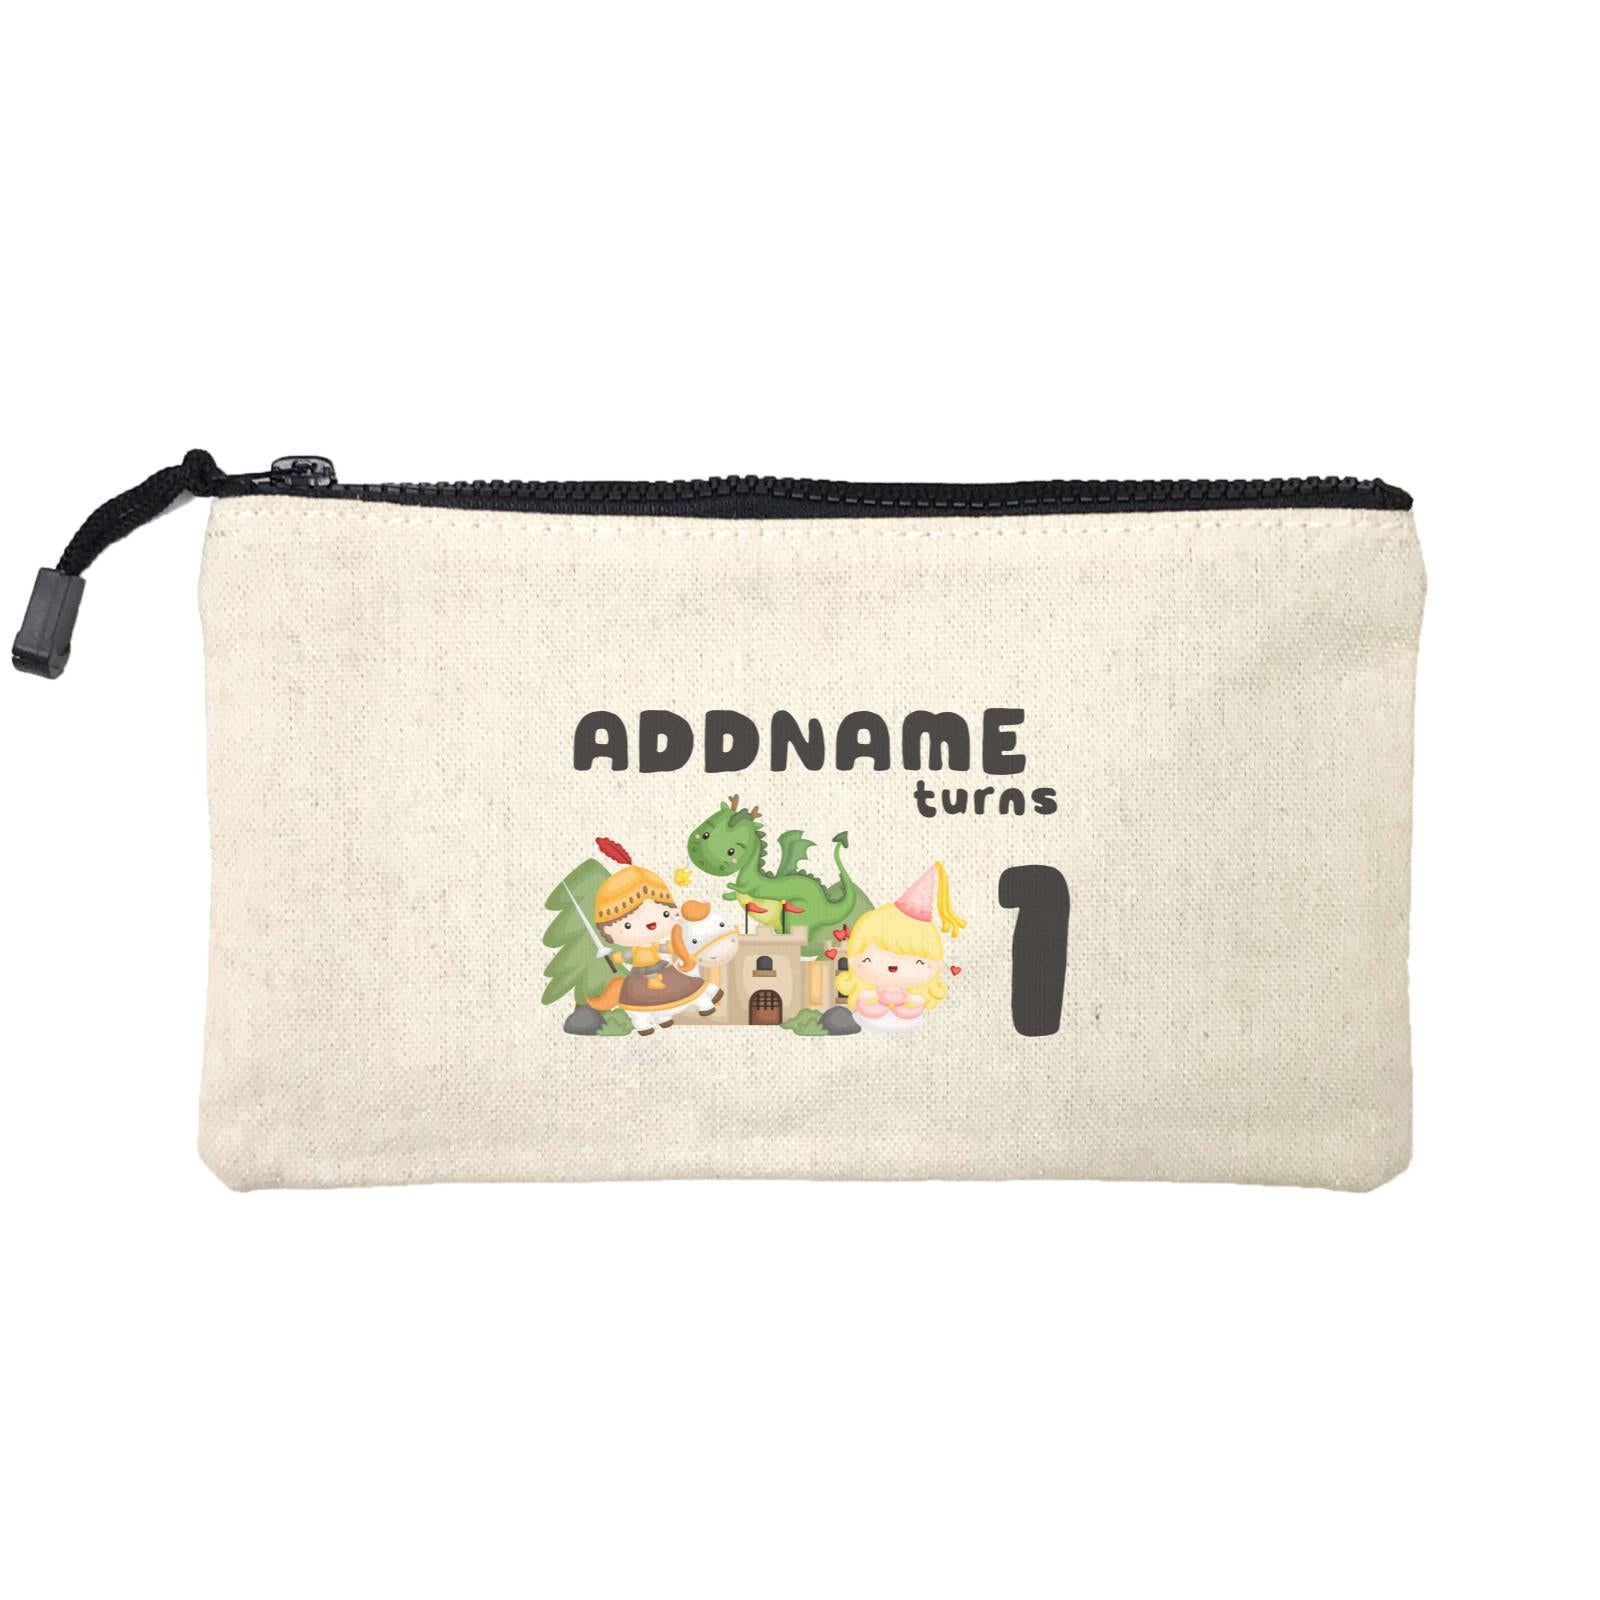 Birthday Royal Group Addname Turns 1 Mini Accessories Stationery Pouch